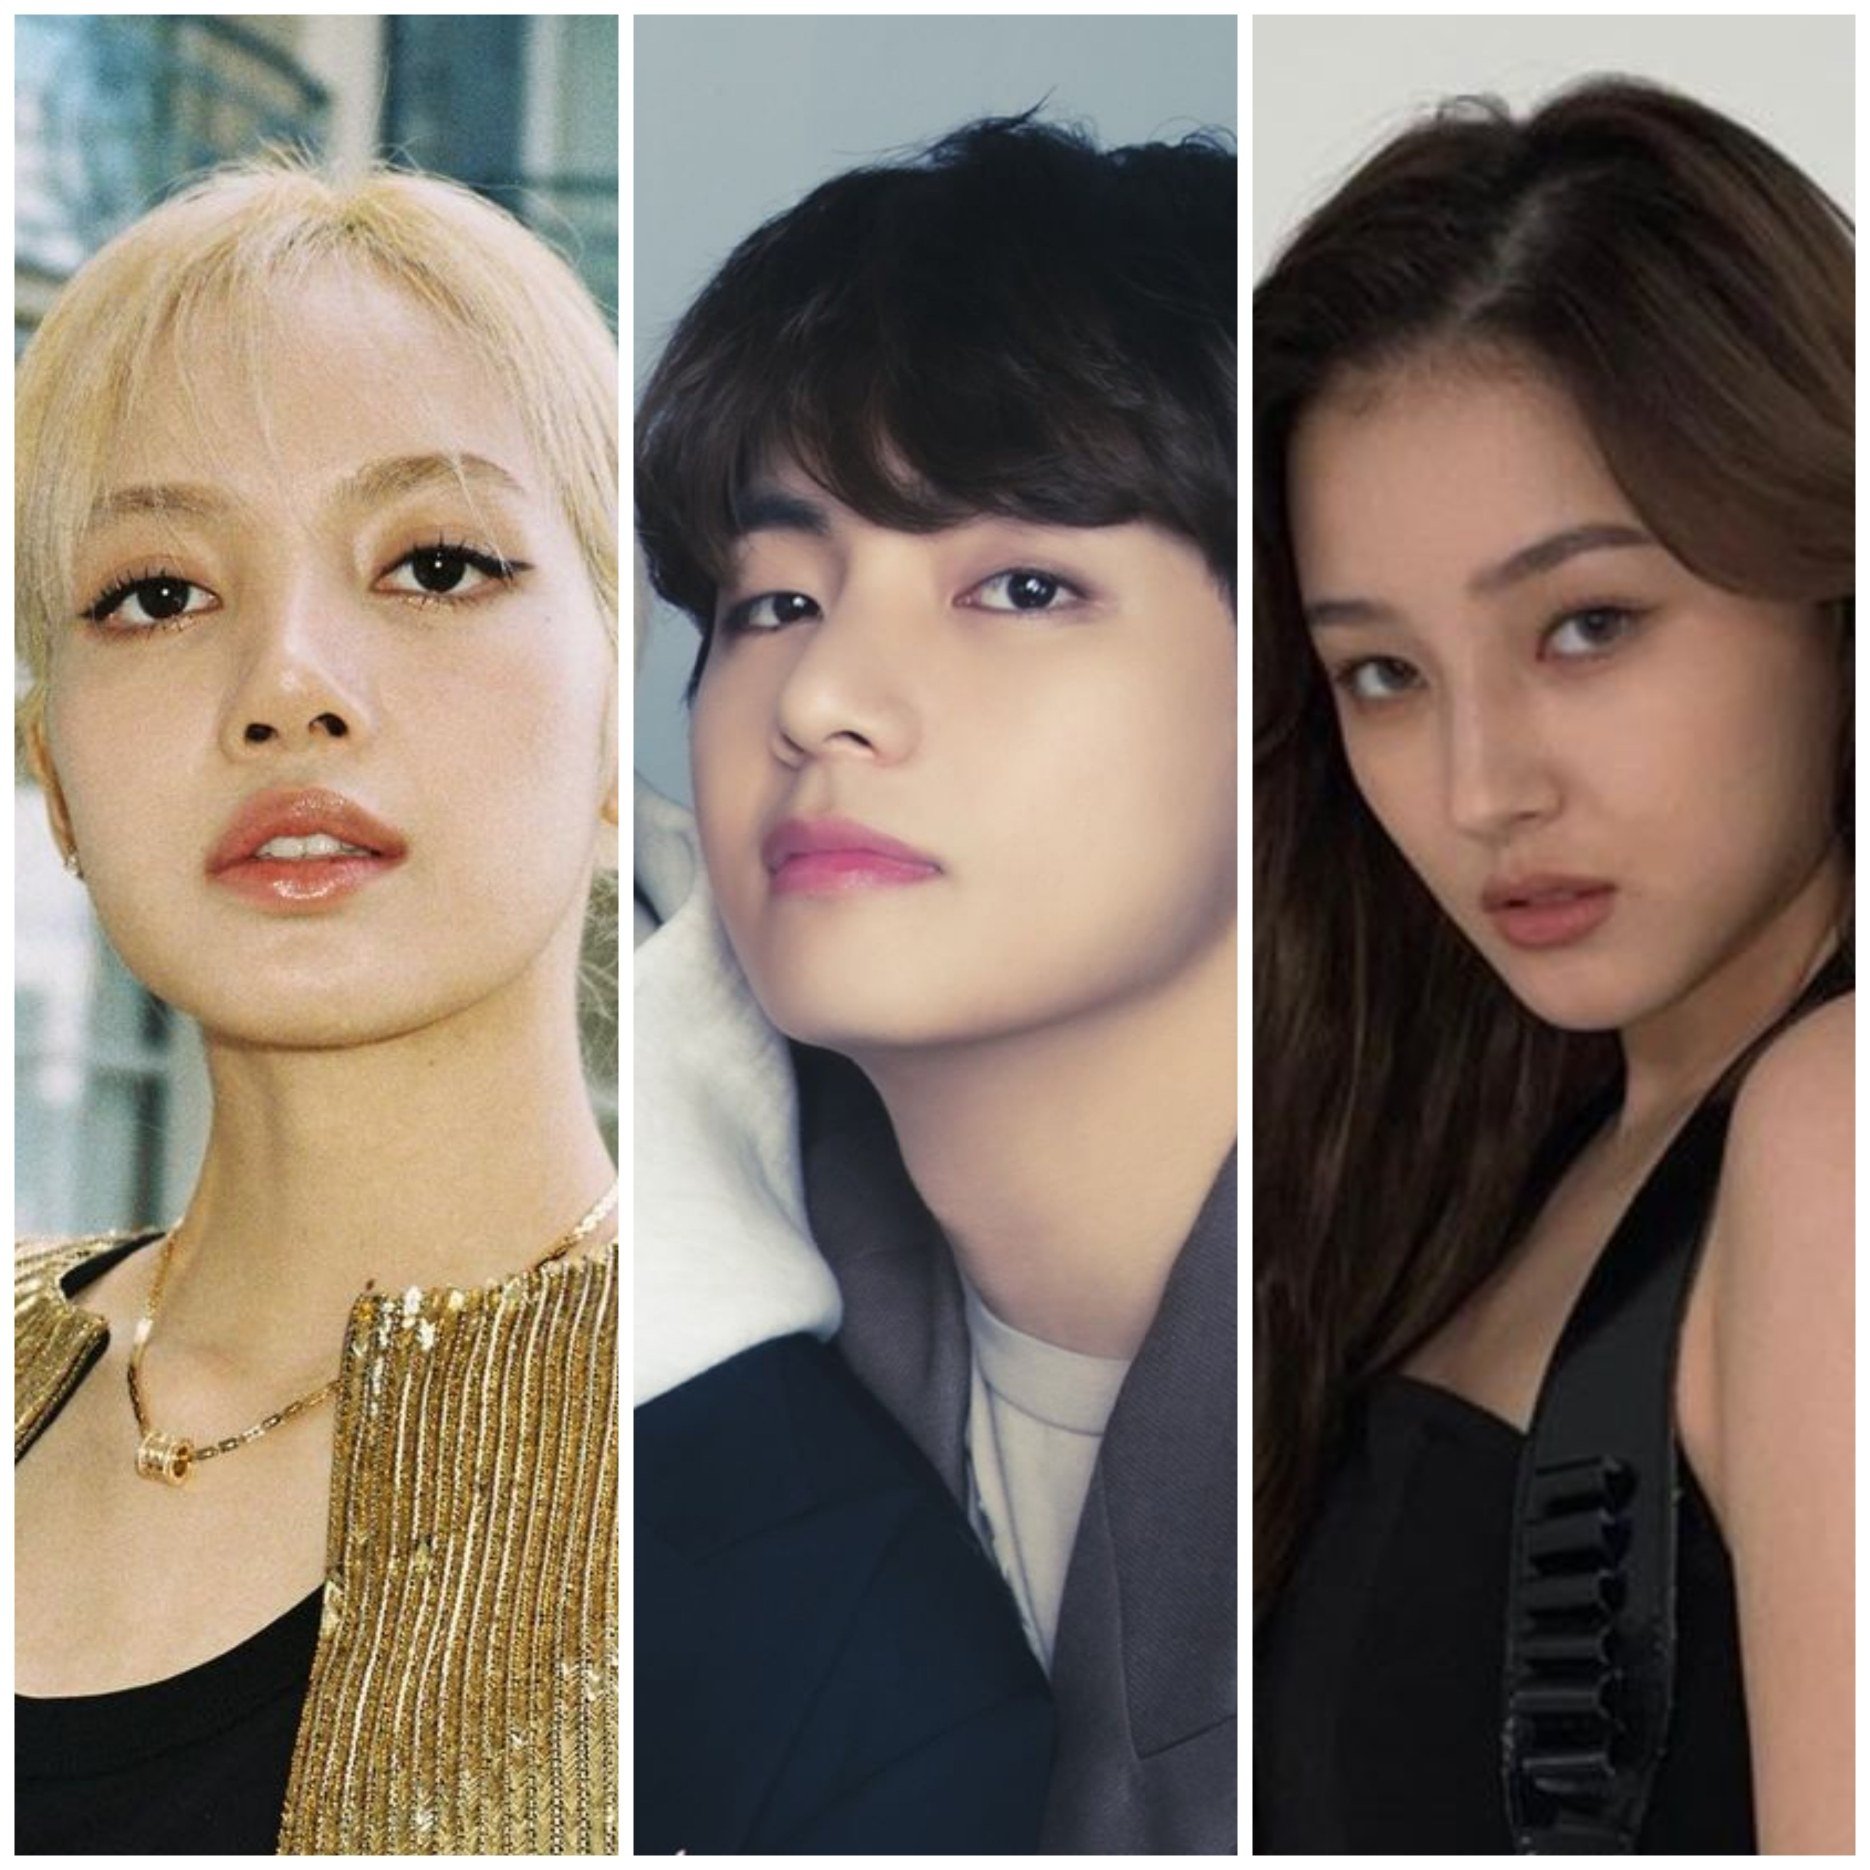 Blackpink’s Lisa, BTS members and Momoland’s Nancy have all found themselves targeted. Photos: @lalalalisa_m, @bts.bighitofficial, @nancyjewel_mcdonie_/Instagram